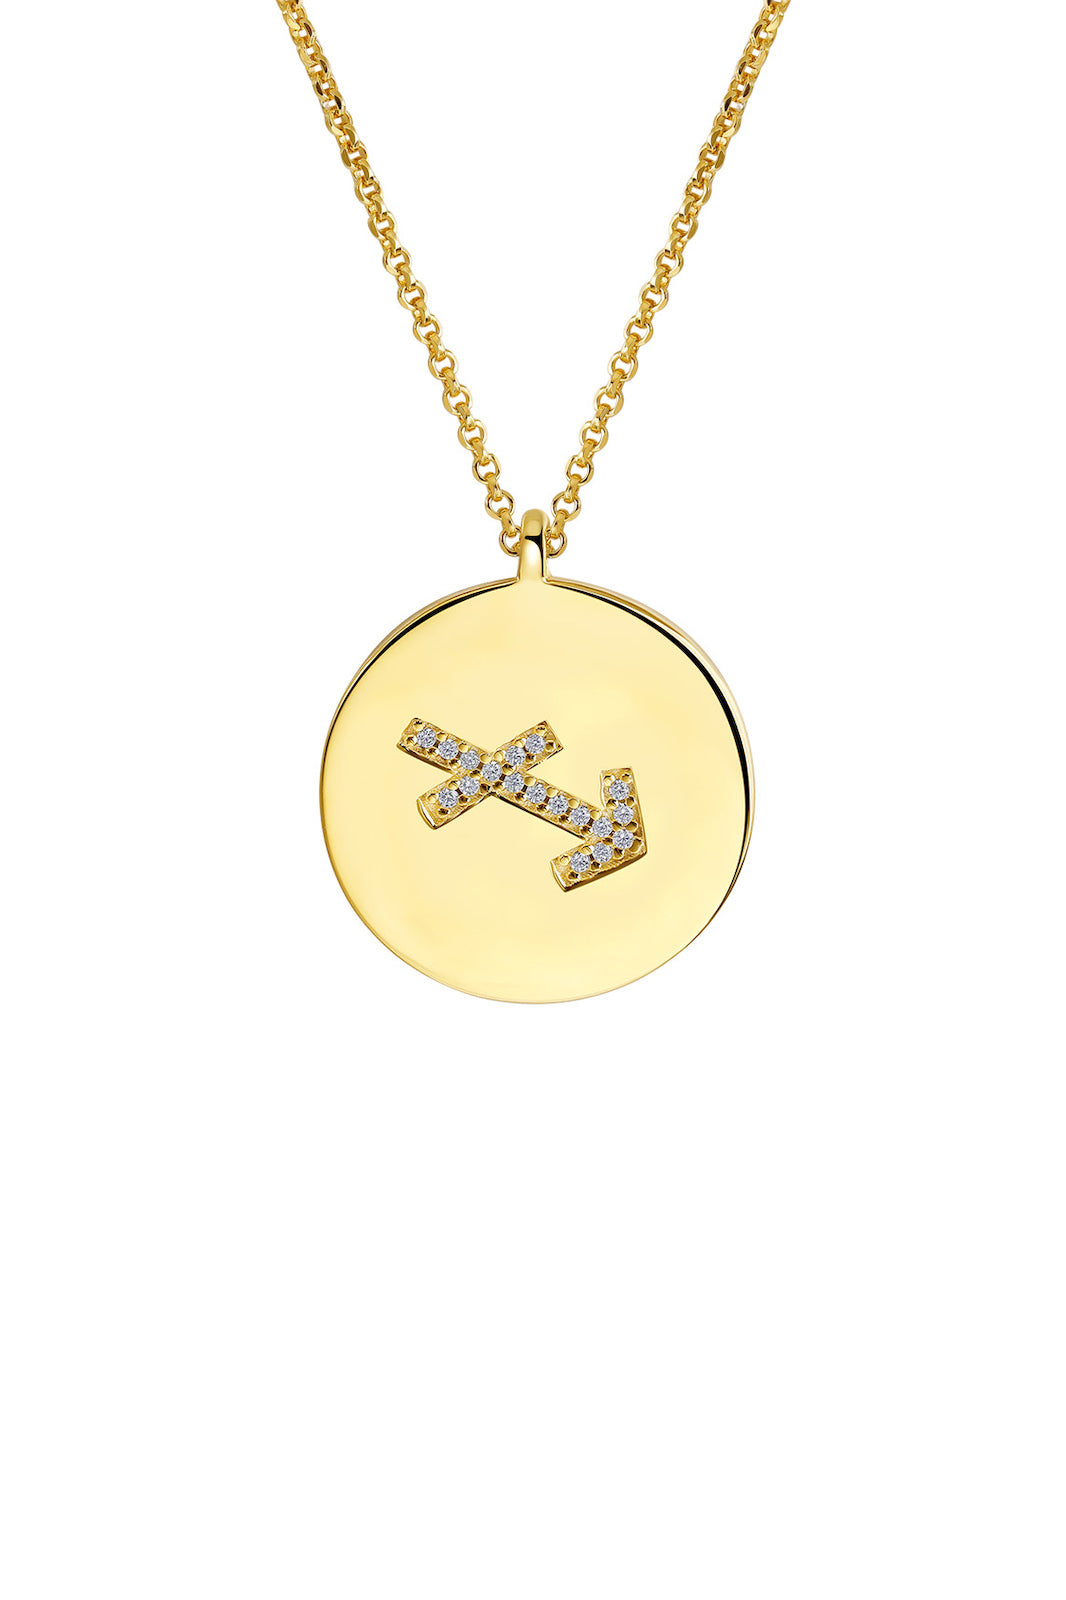 Gold Plated Silver Zodiac Necklace - Sagittarius Side View